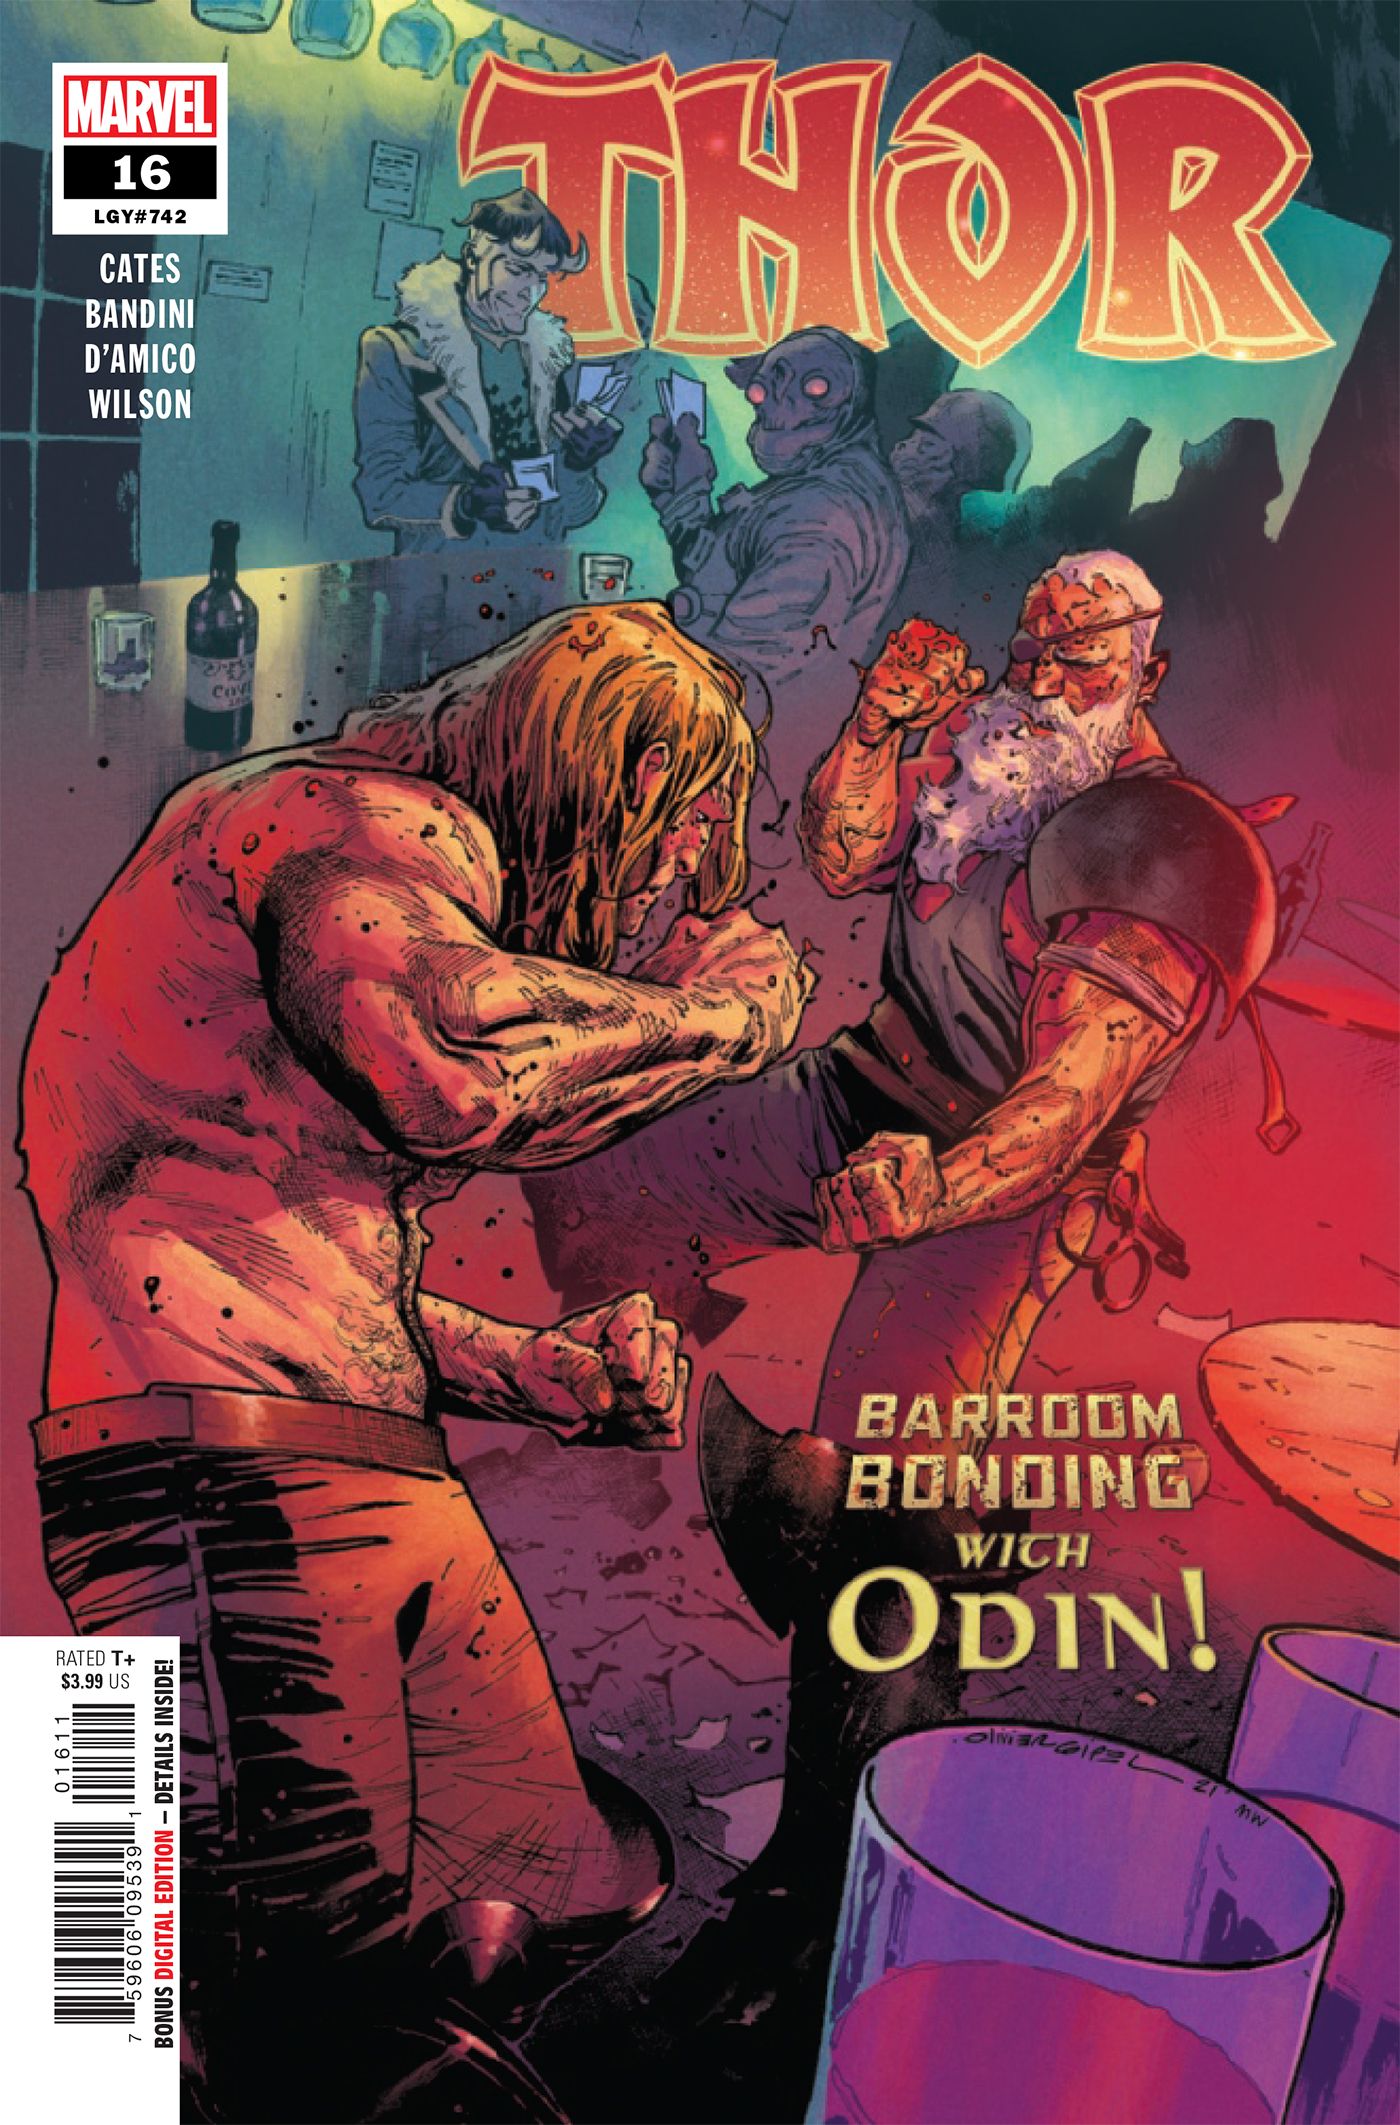 The cover for Thor #16 sees Thor and Odin in a bar brawl.